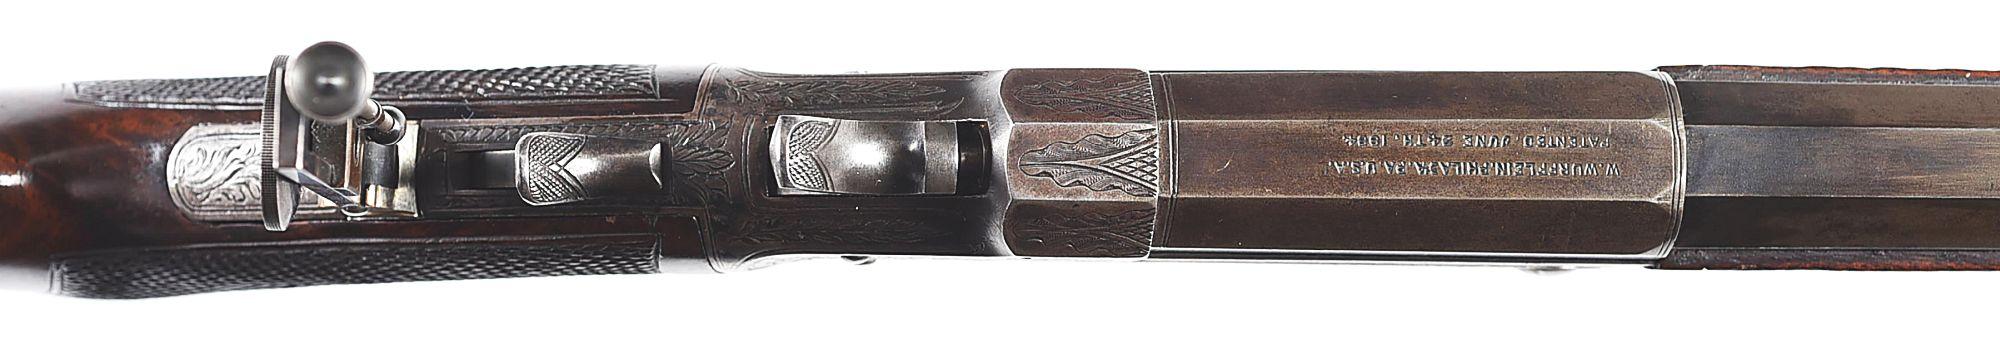 (A) ATTRACTIVE ENGRAVED DELUXE WURFFLEIN SINGLE SHOT GALLERY RIFLE.